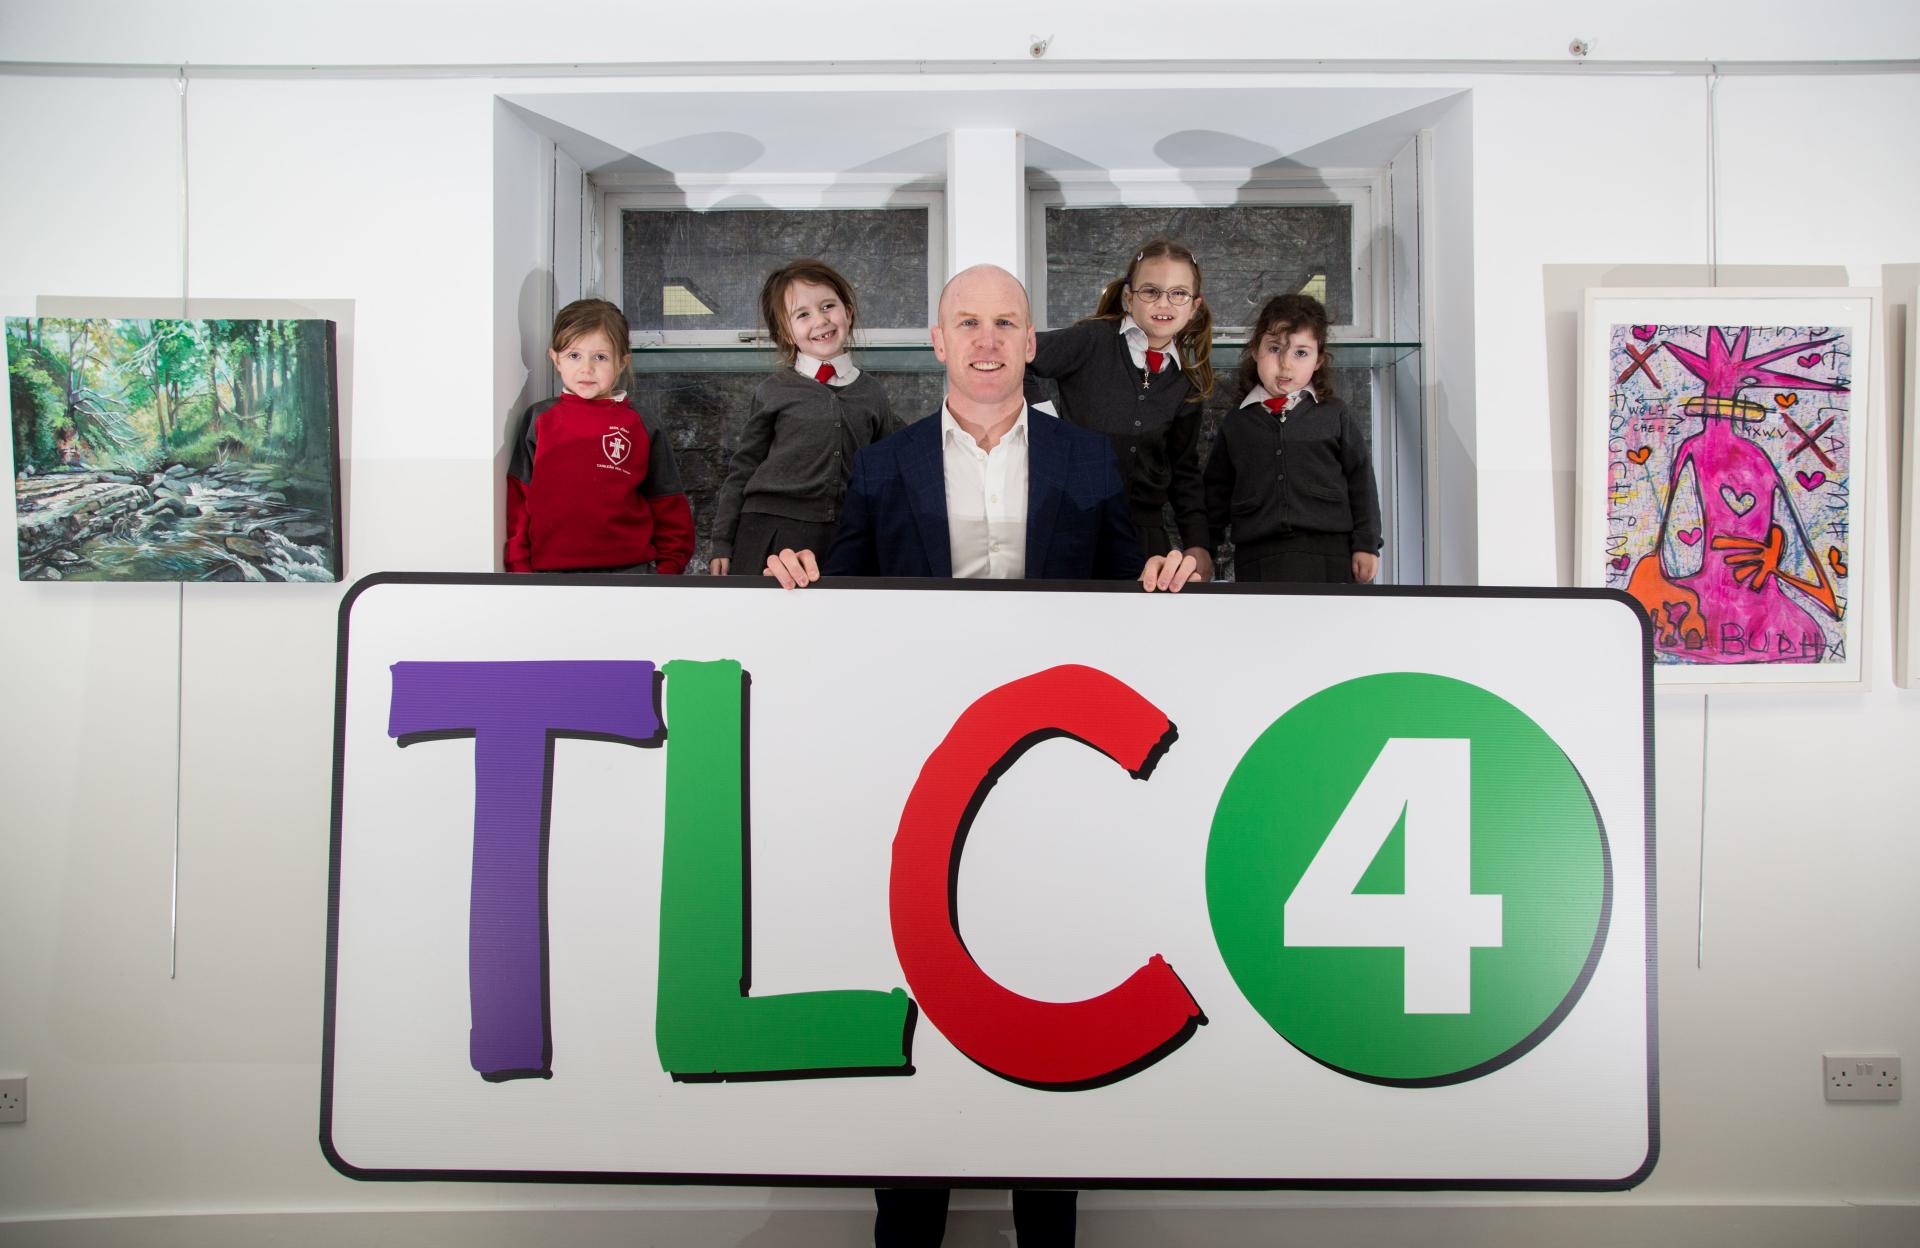 TLC4 launched by Paul O'Connell & co